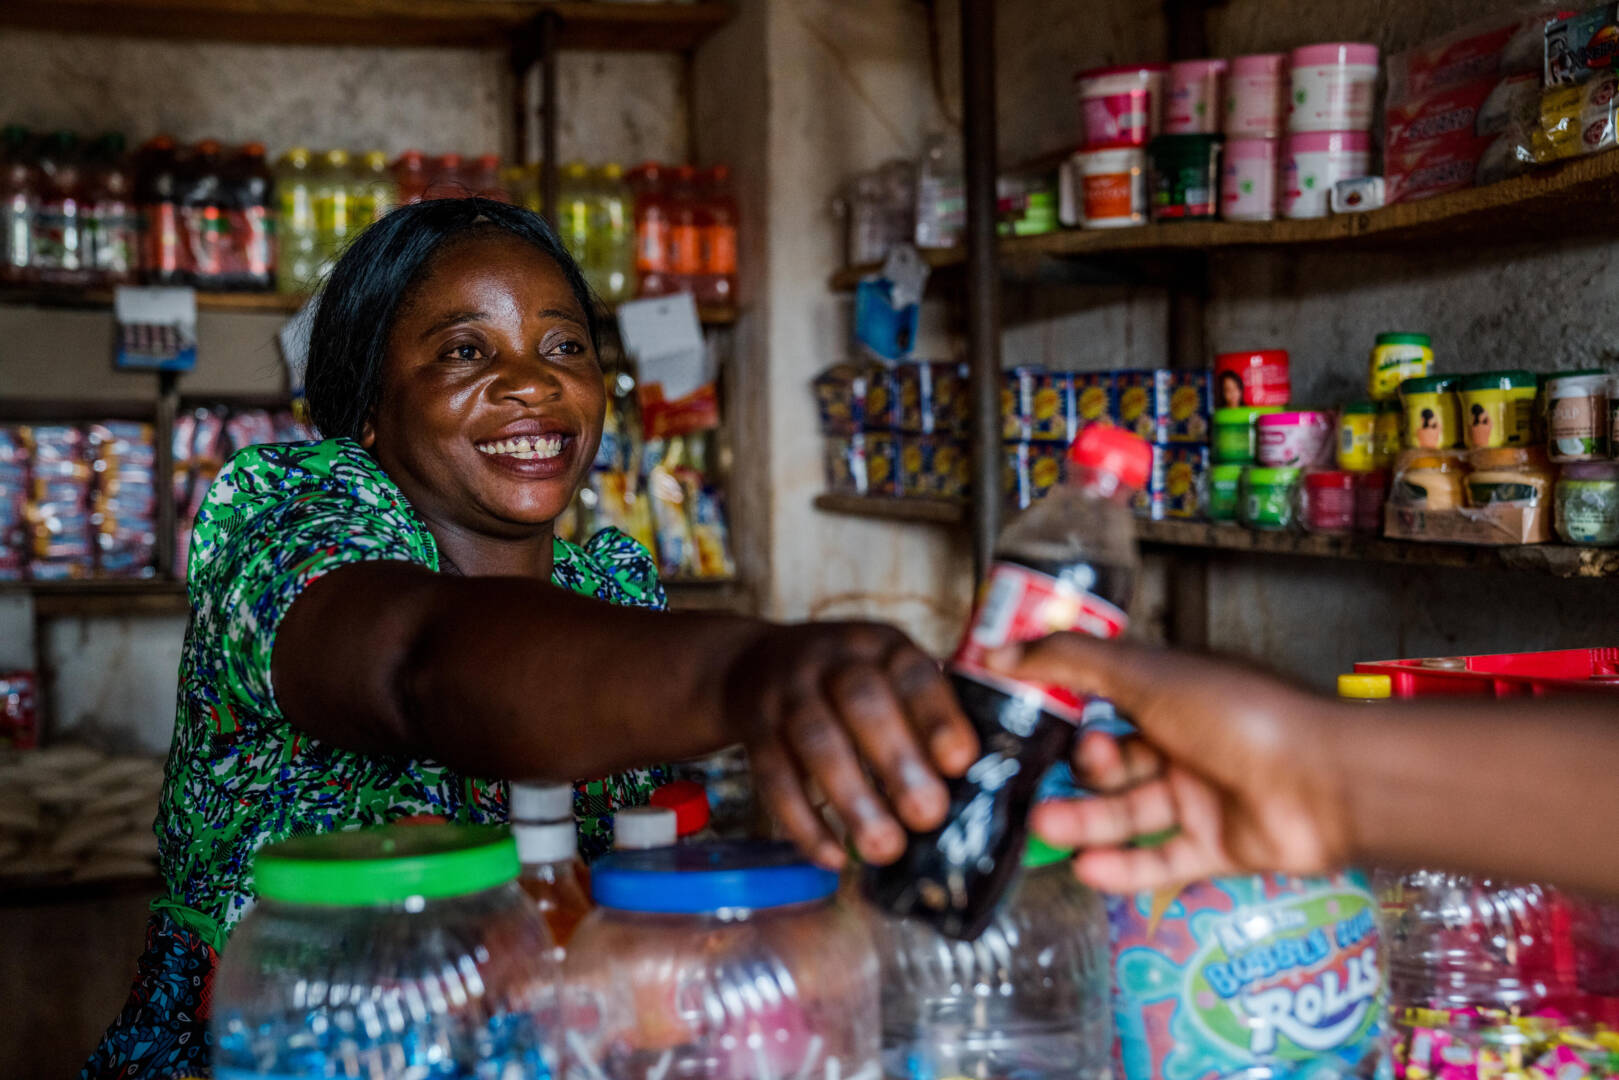 Inside a small shop, a smiling woman hands a drink to a customer over a counter.